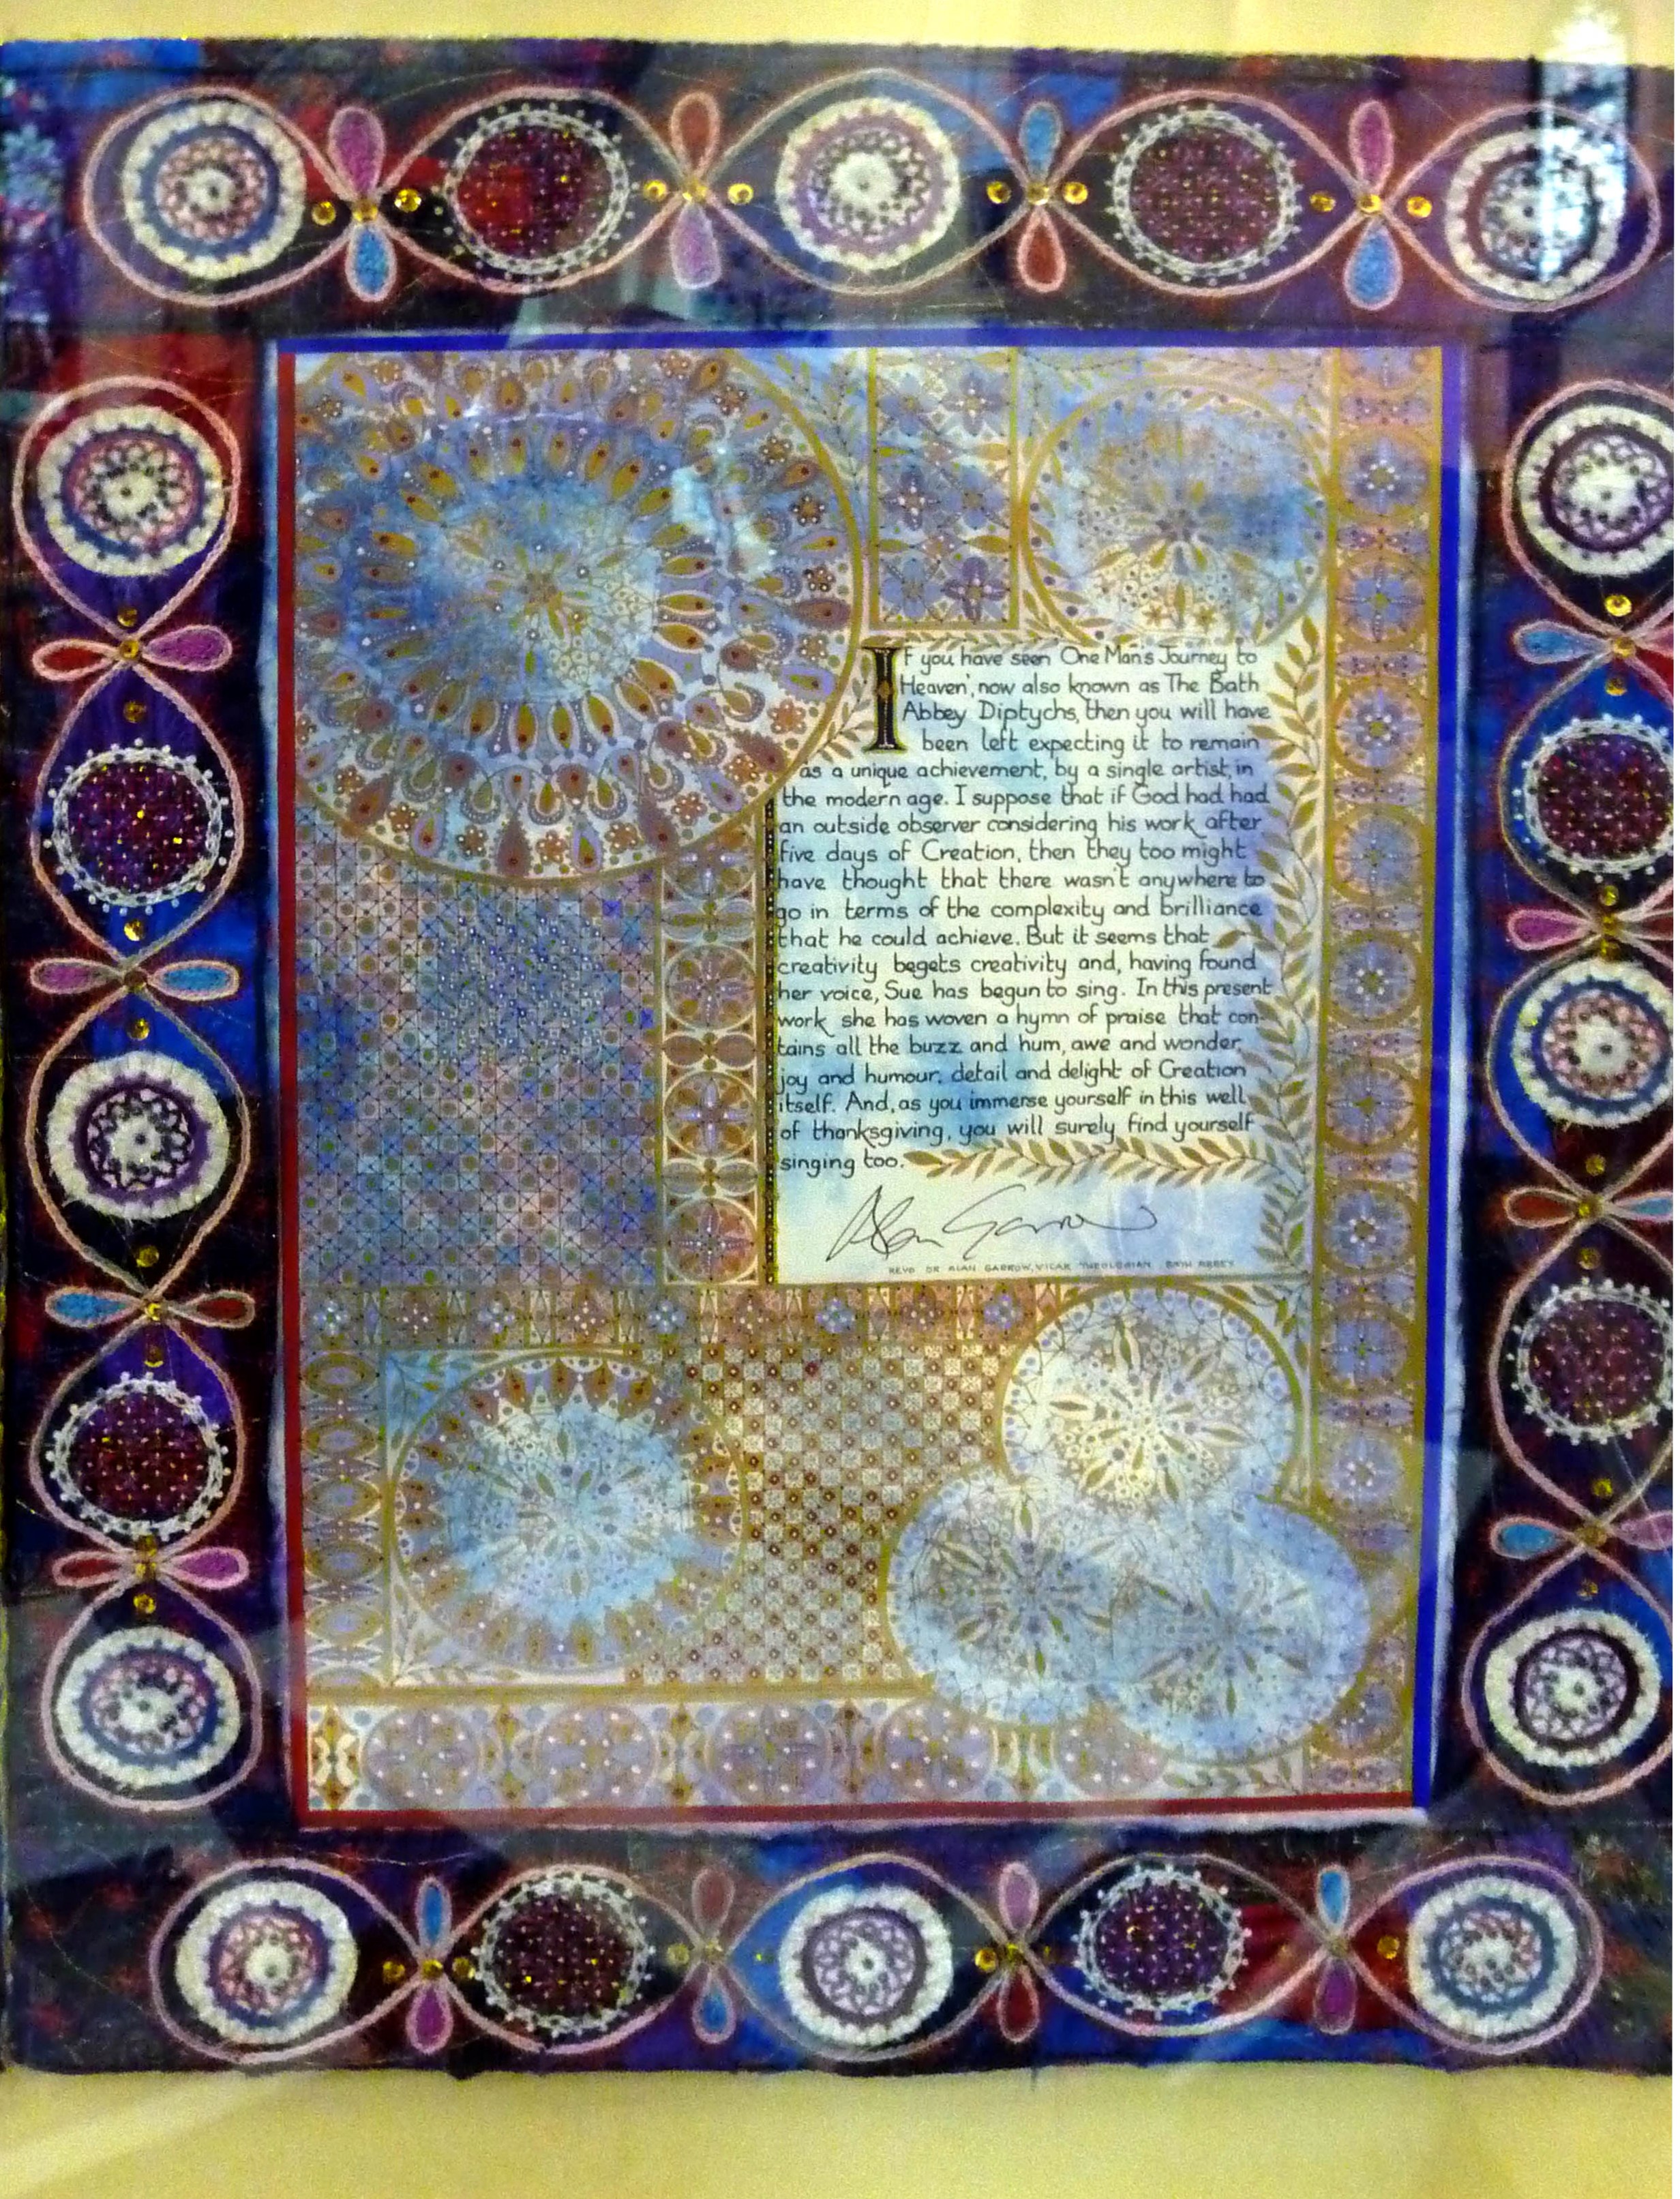 CREATION: A CELEBRATION by Sue Symonds, PREFACE (double spread), painting with embroidered frame